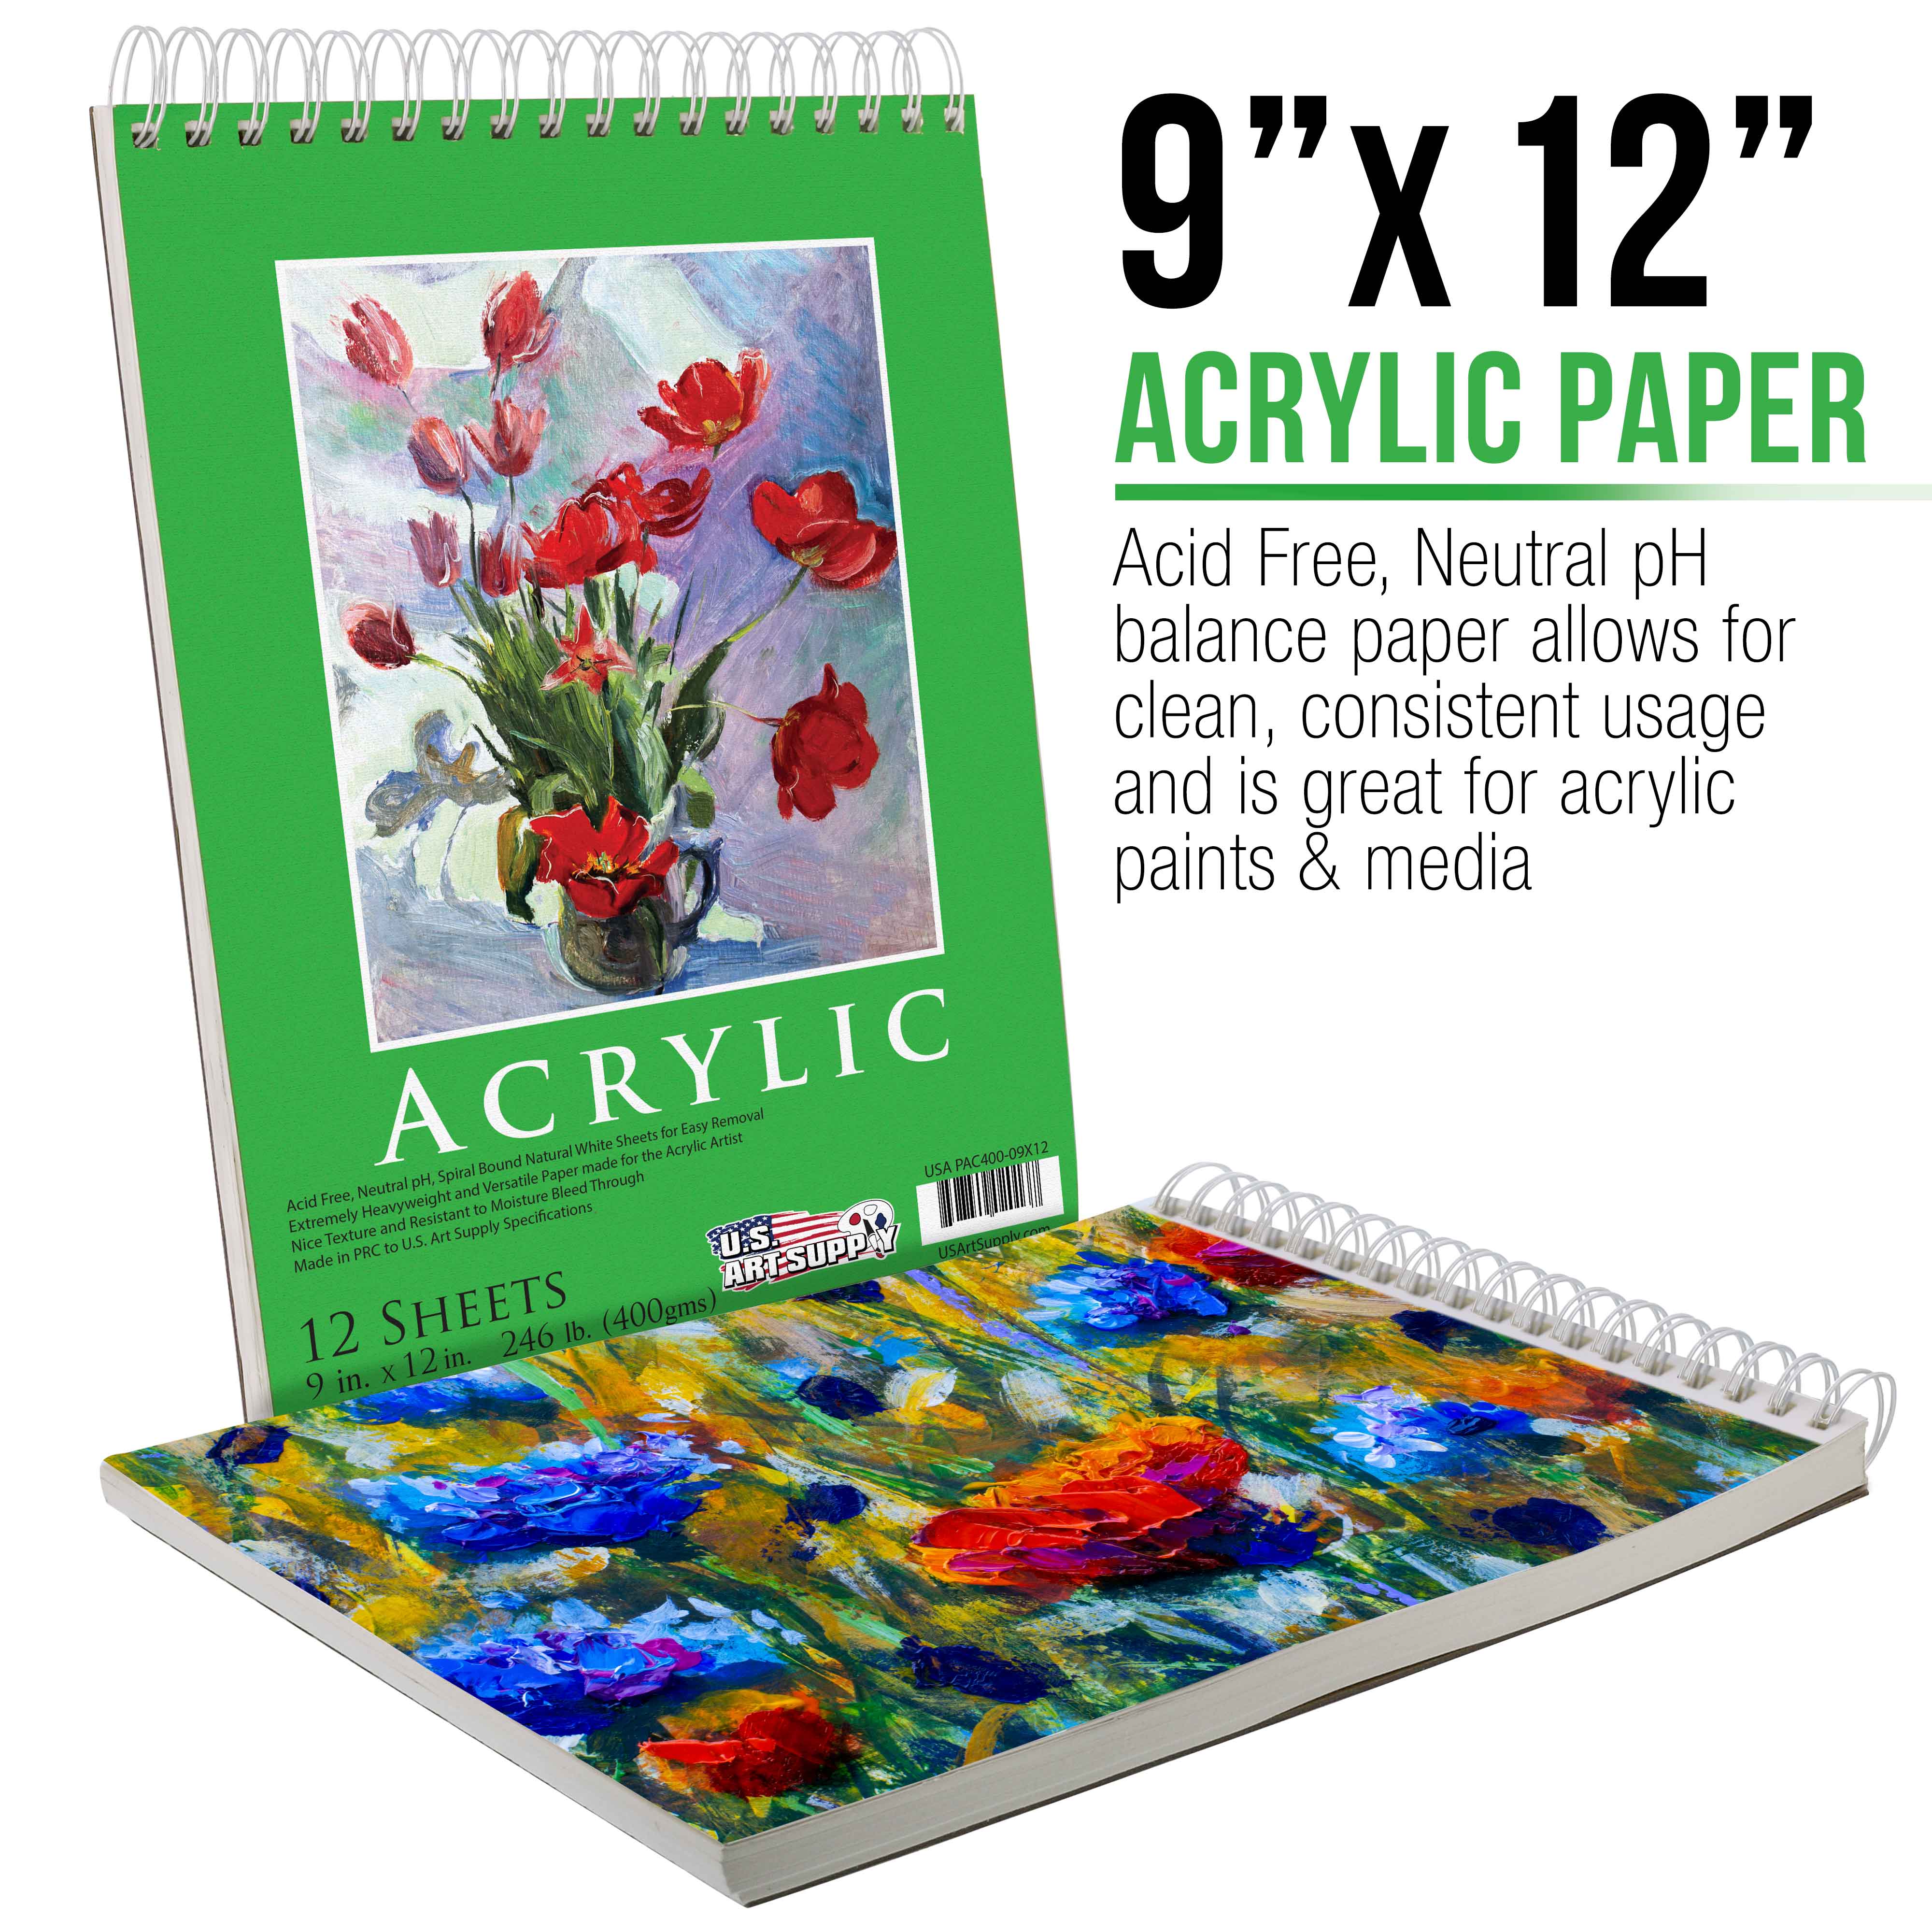 U.S. Art Supply 9 x 12 Premium Extra Heavy-Weight Acrylic Painting Paper Pad, 246 Pound (400gsm), Spiral Bound, Pad of 12-Sheets (Pack of 2 Pads)